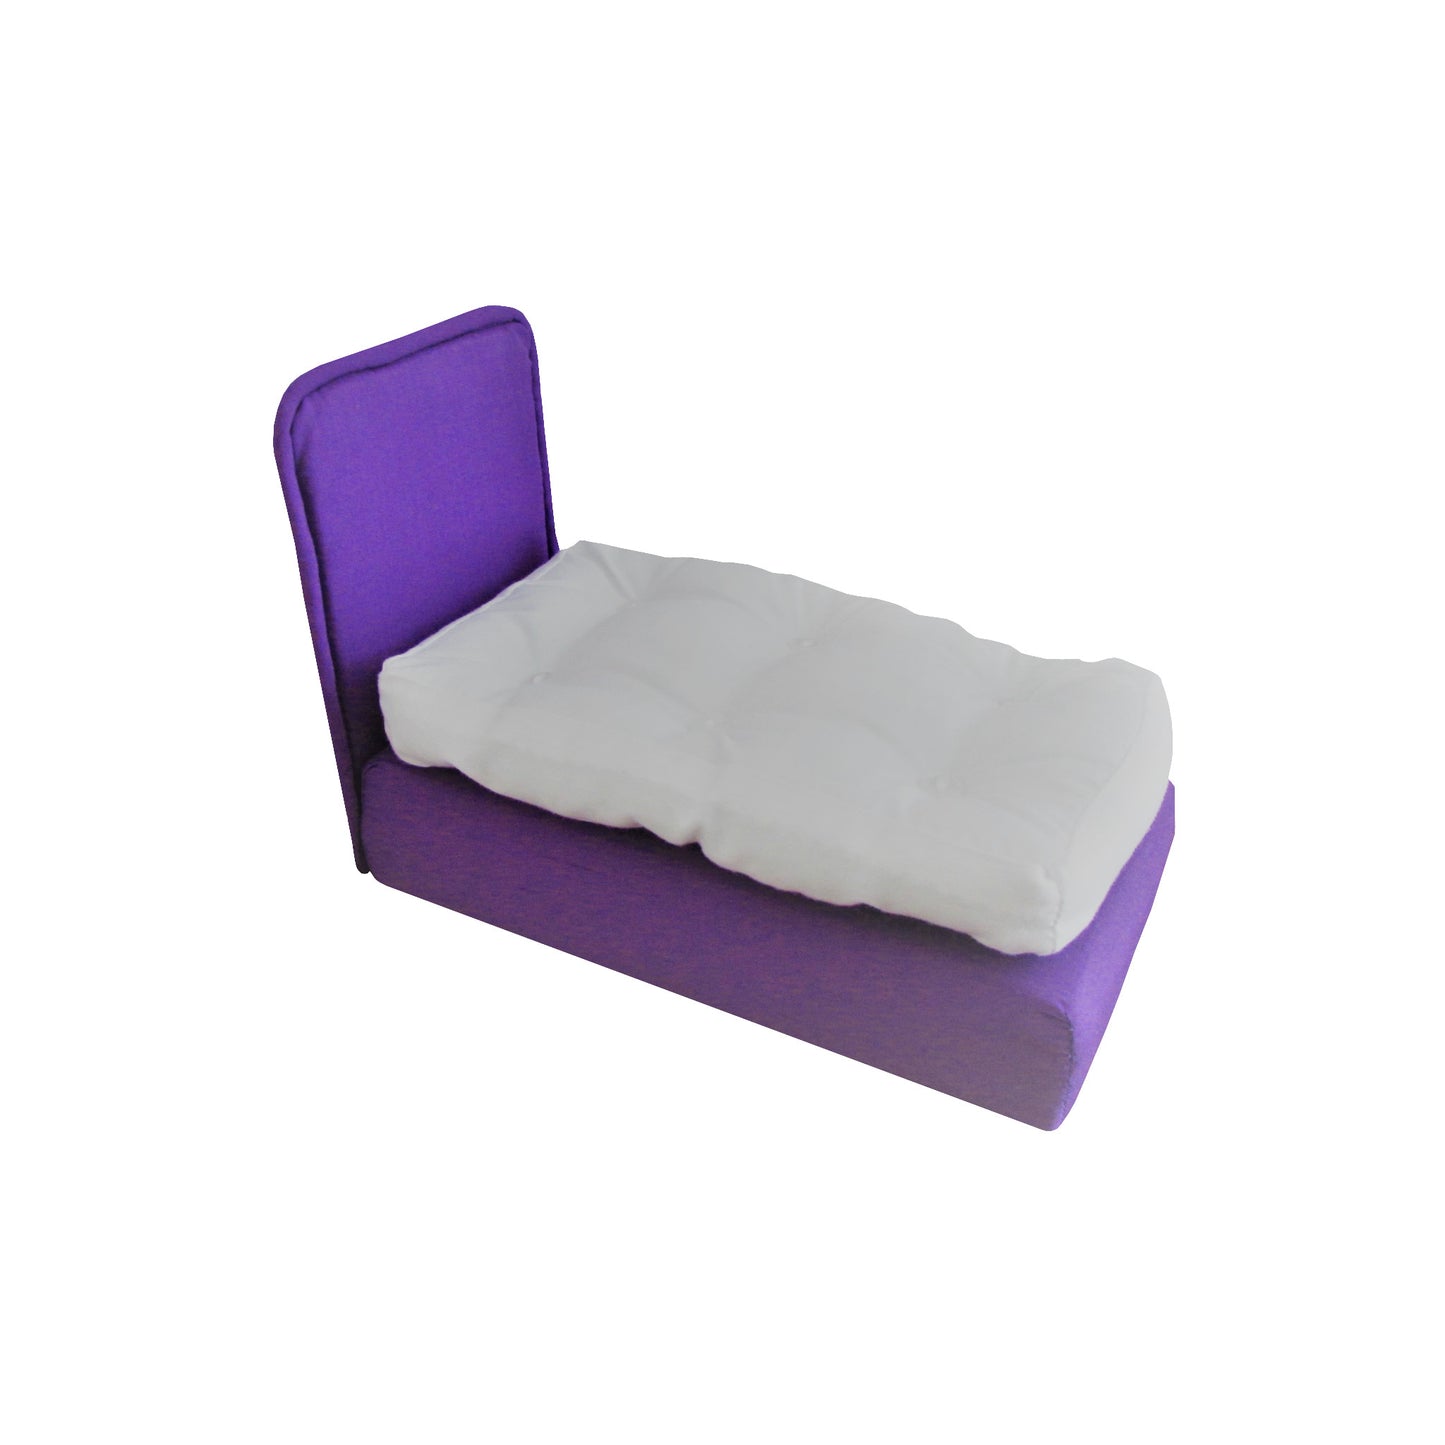 Upholstered Purpld Doll Bed and Mattress for 6.5-inch dolls